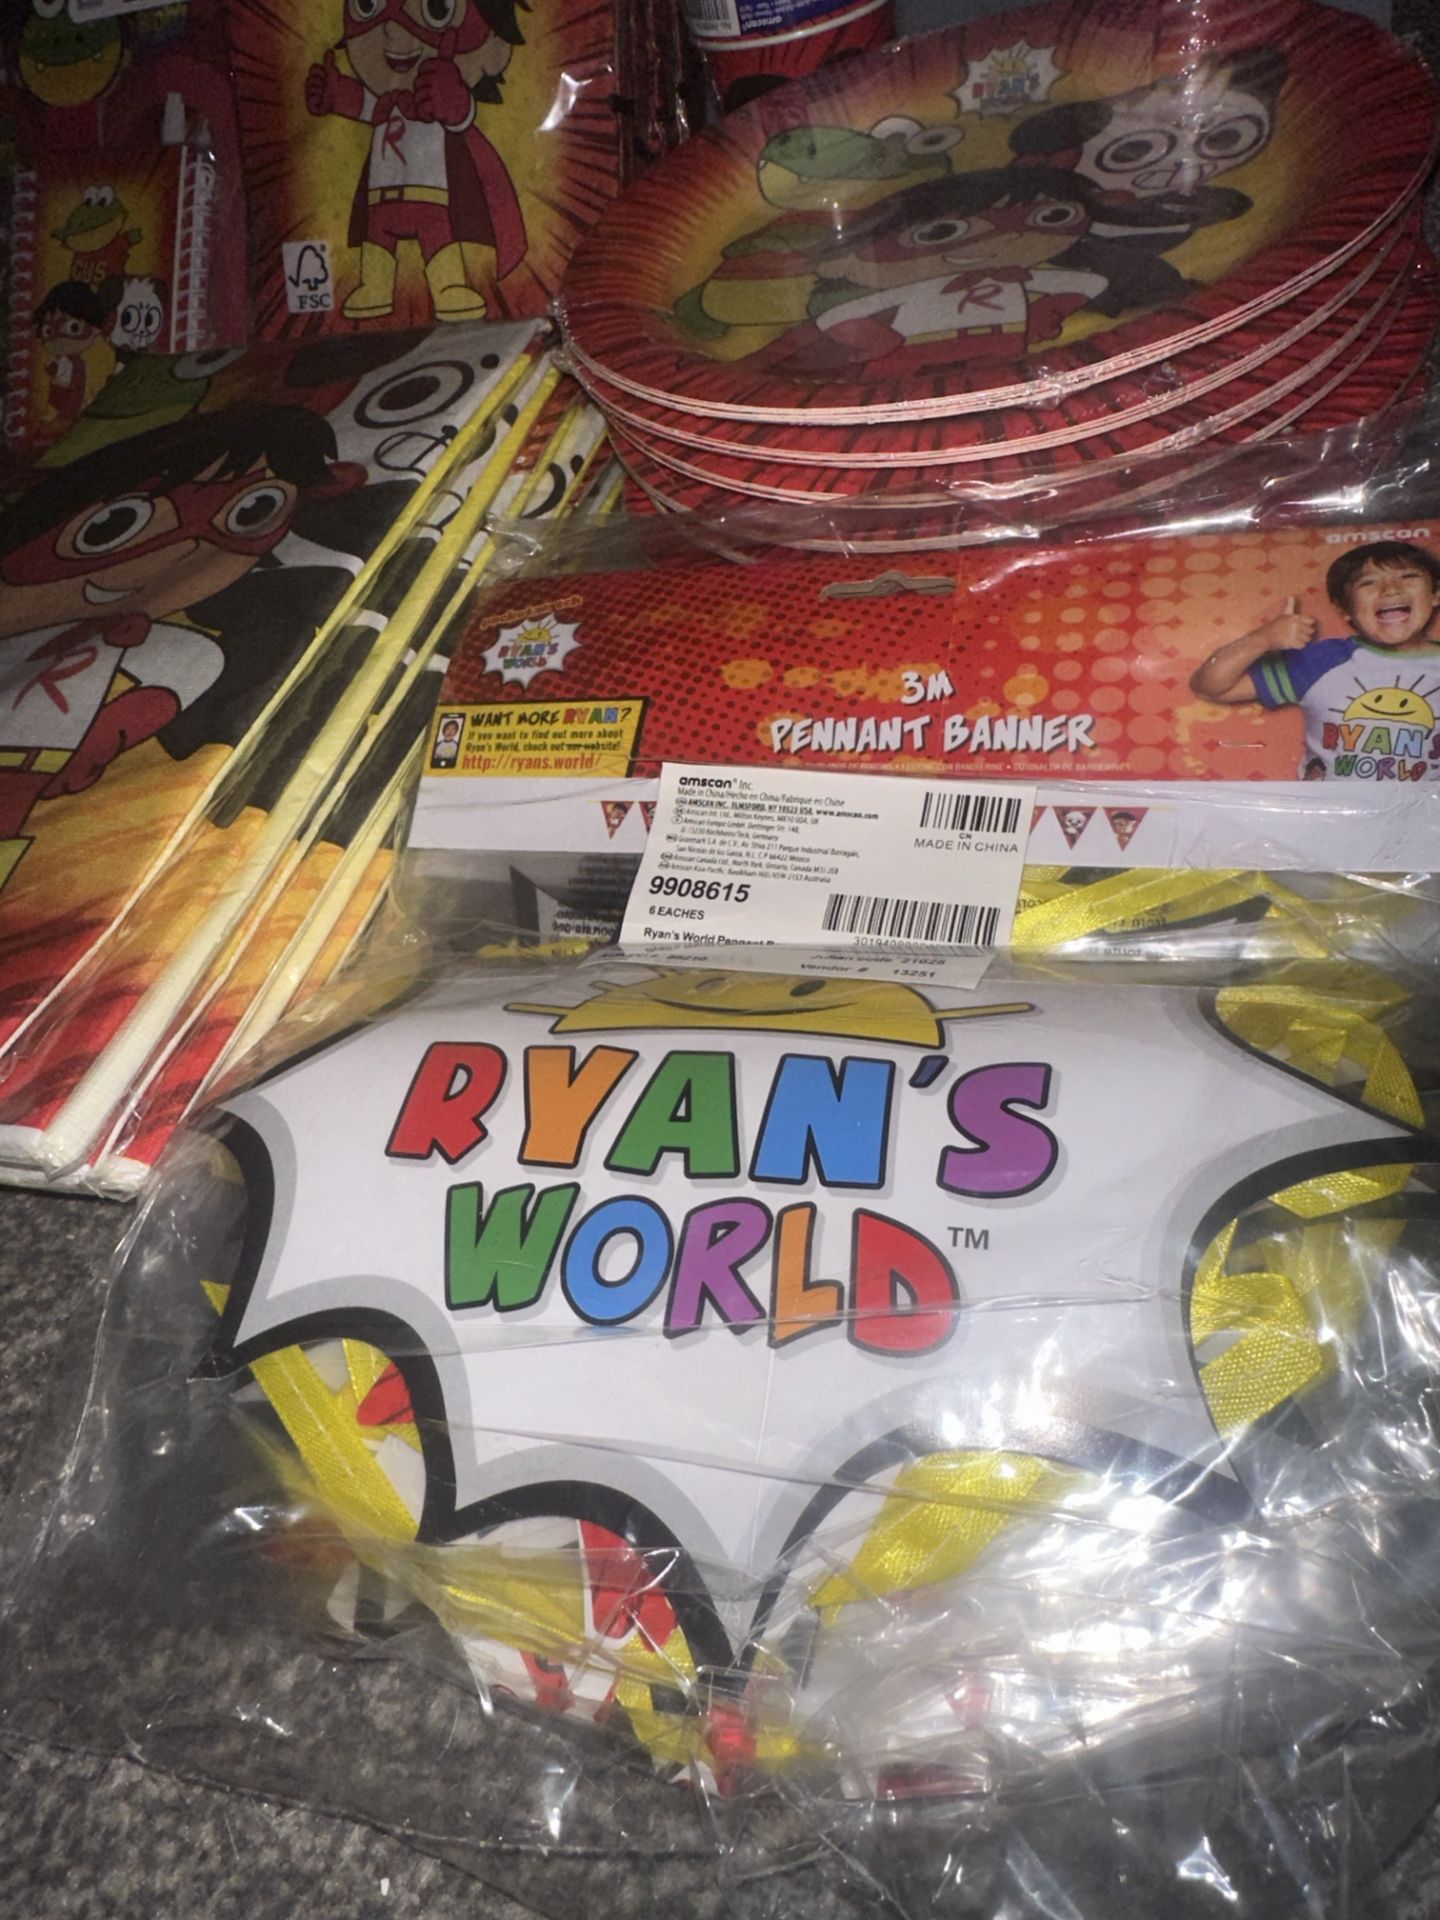 246pcs Ryan’s World Bundle Banners , Napkins, Plates, Cups, Loot Bags ++ - Image 4 of 5